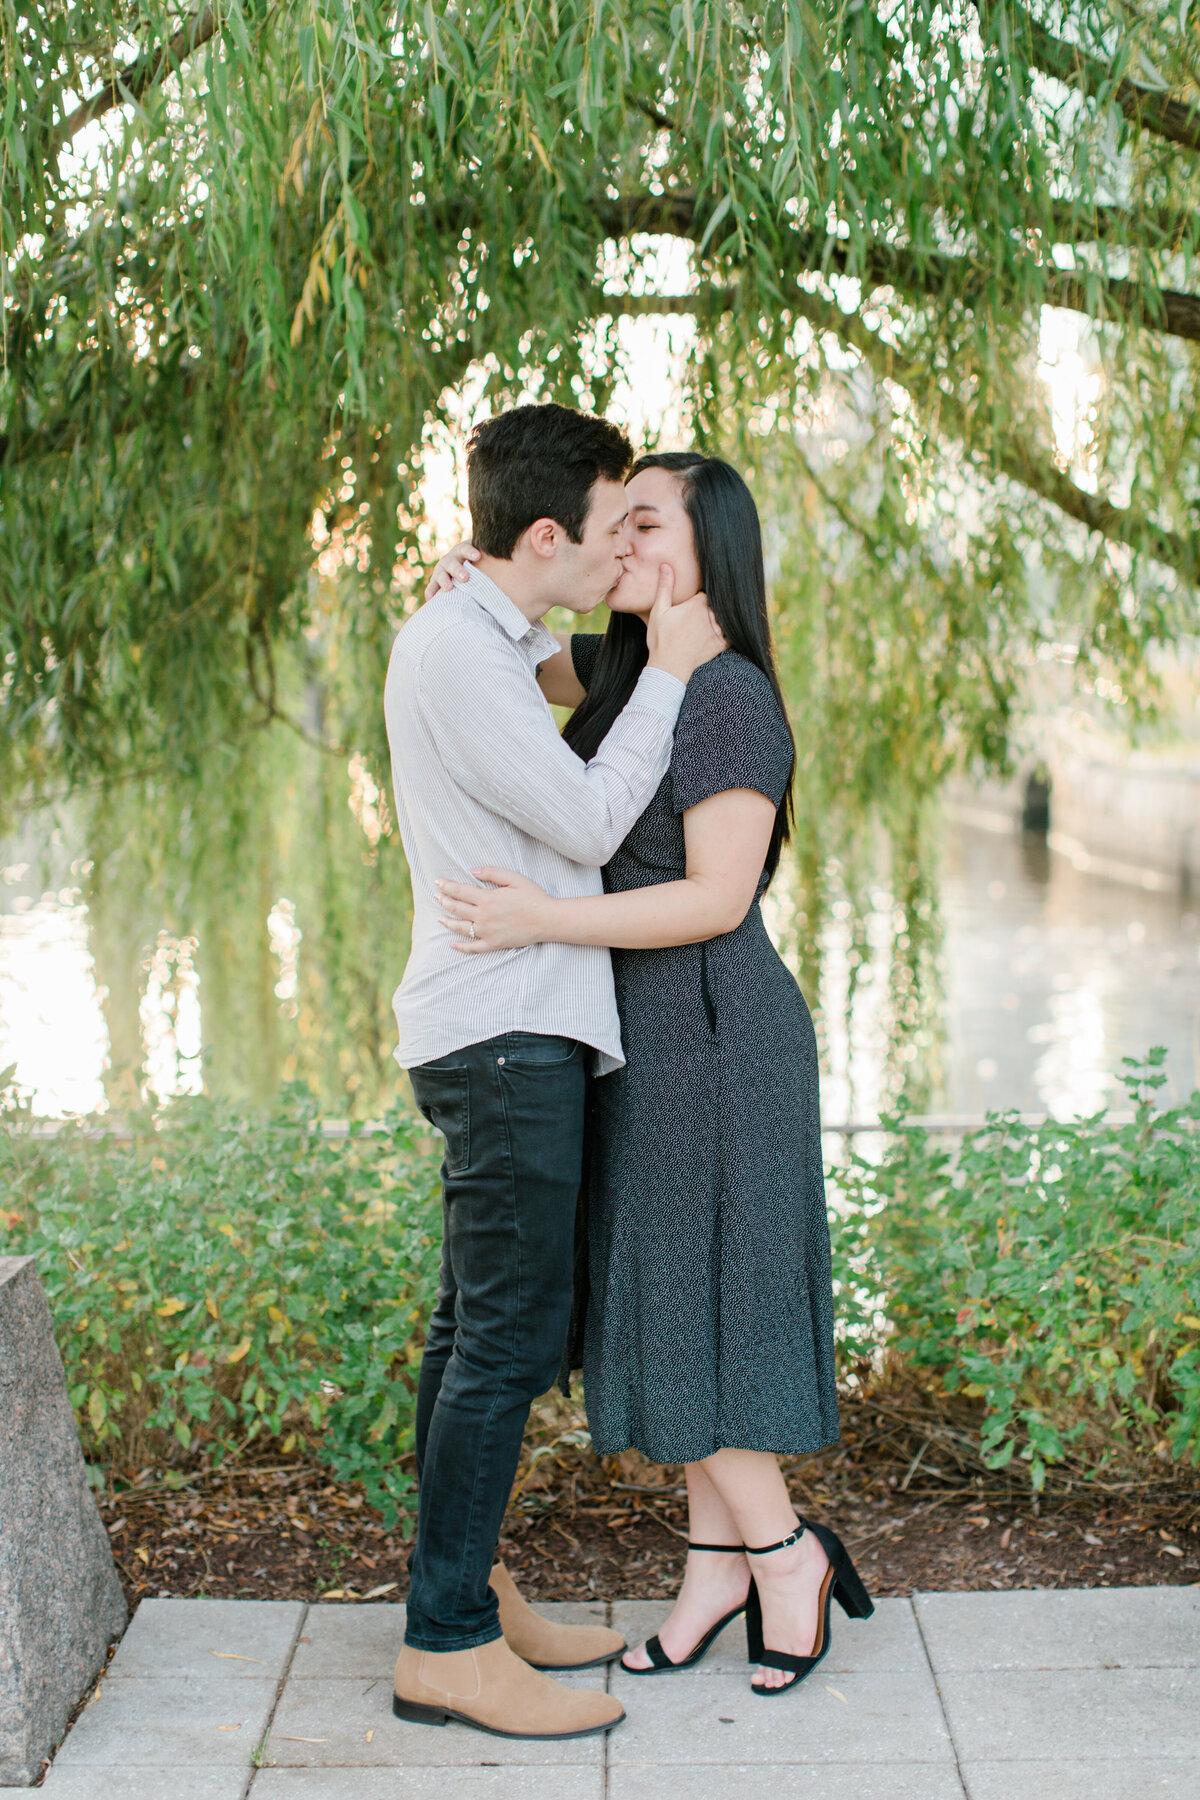 Becky_Collin_Navy_Yards_Park_The_Wharf_Washington_DC_Fall_Engagement_Session_AngelikaJohnsPhotography-7840